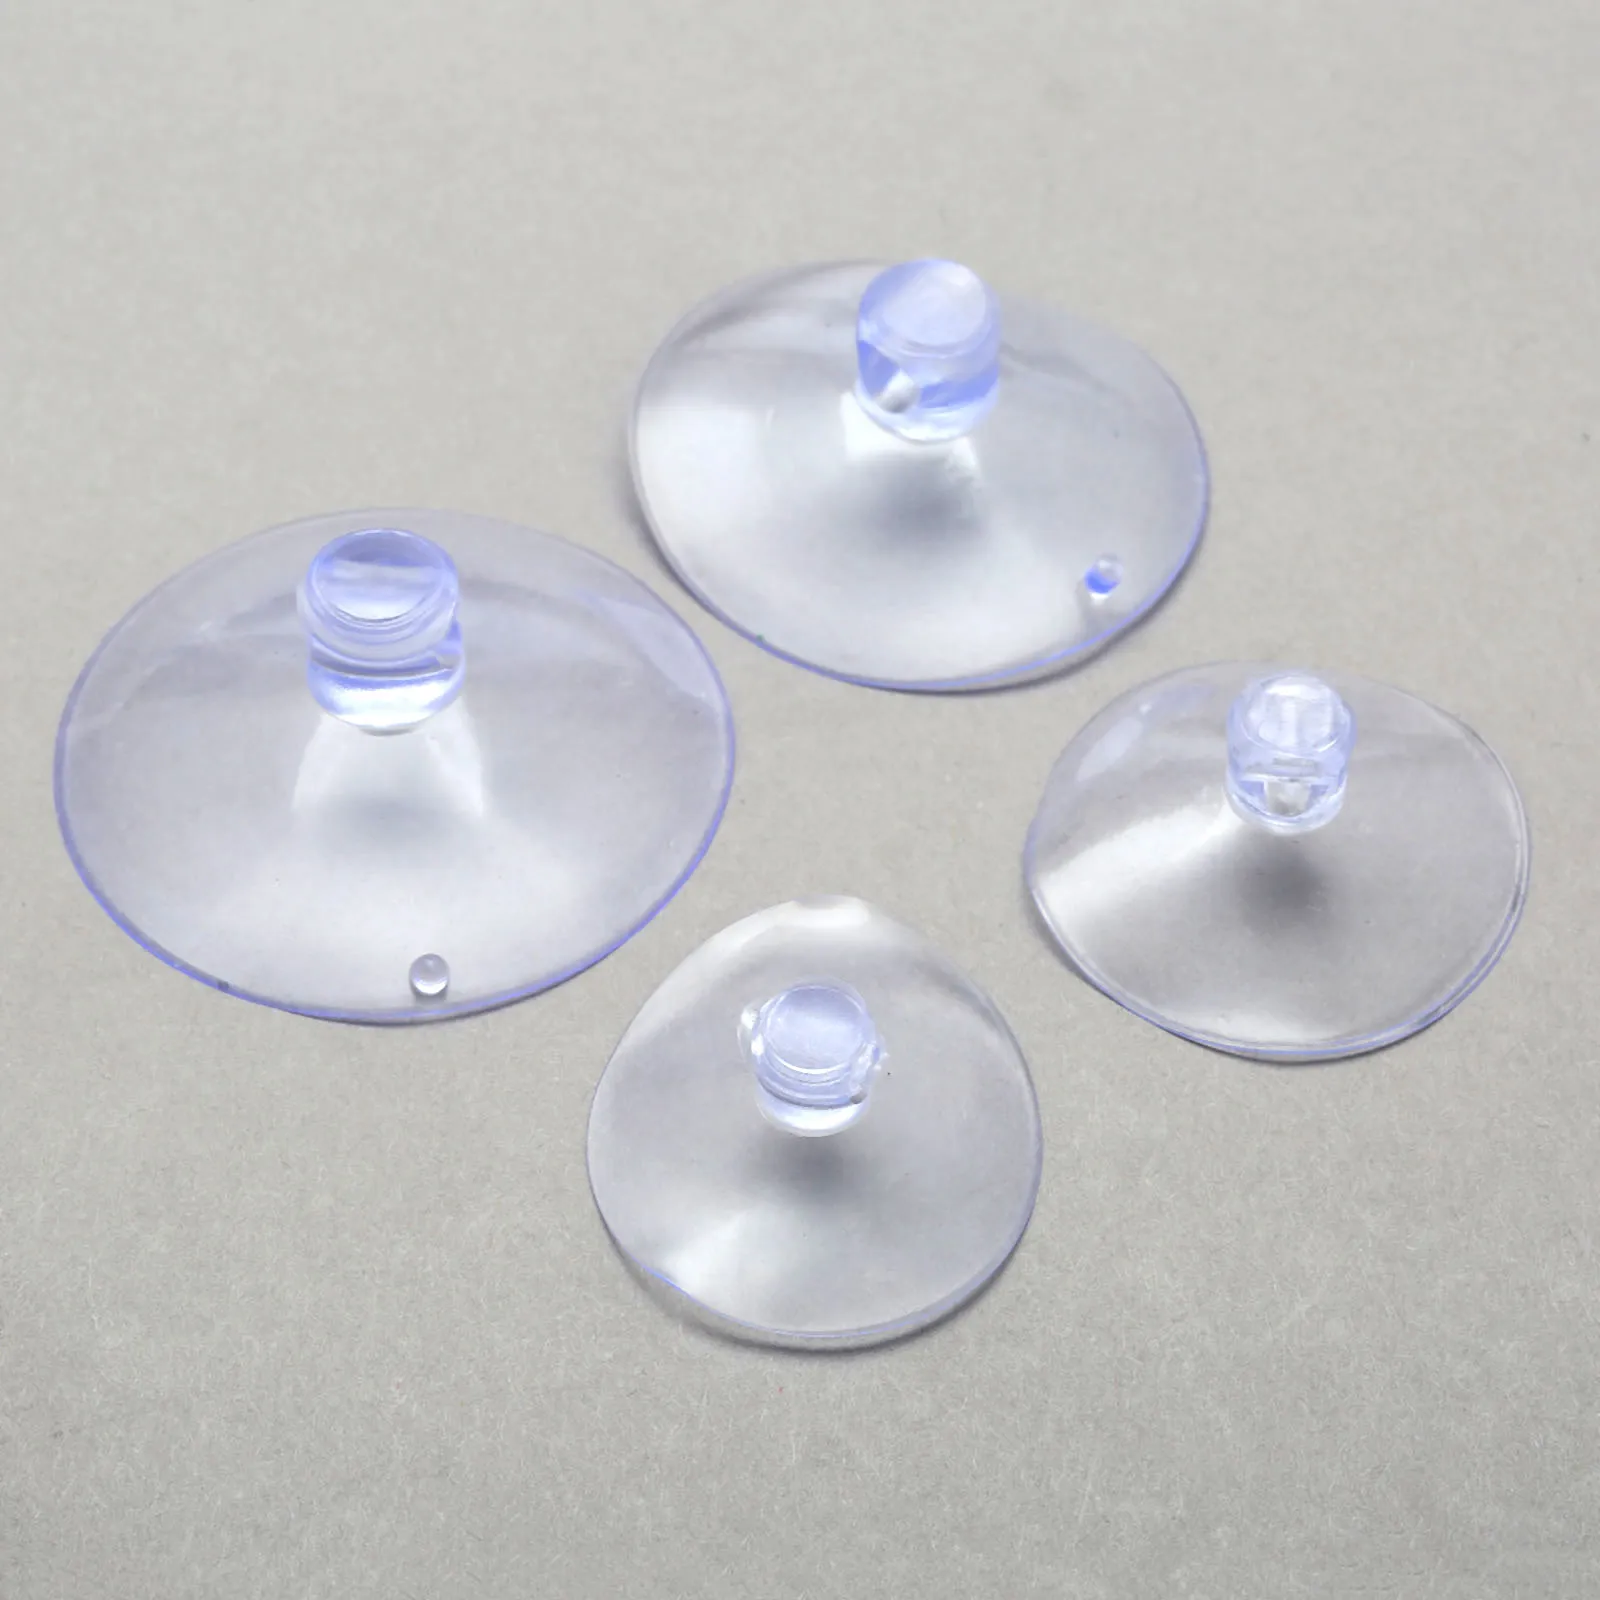 10x 40mm Large Suction Cups Plastic Sucker Pads With Hooks Bathroom Glass 